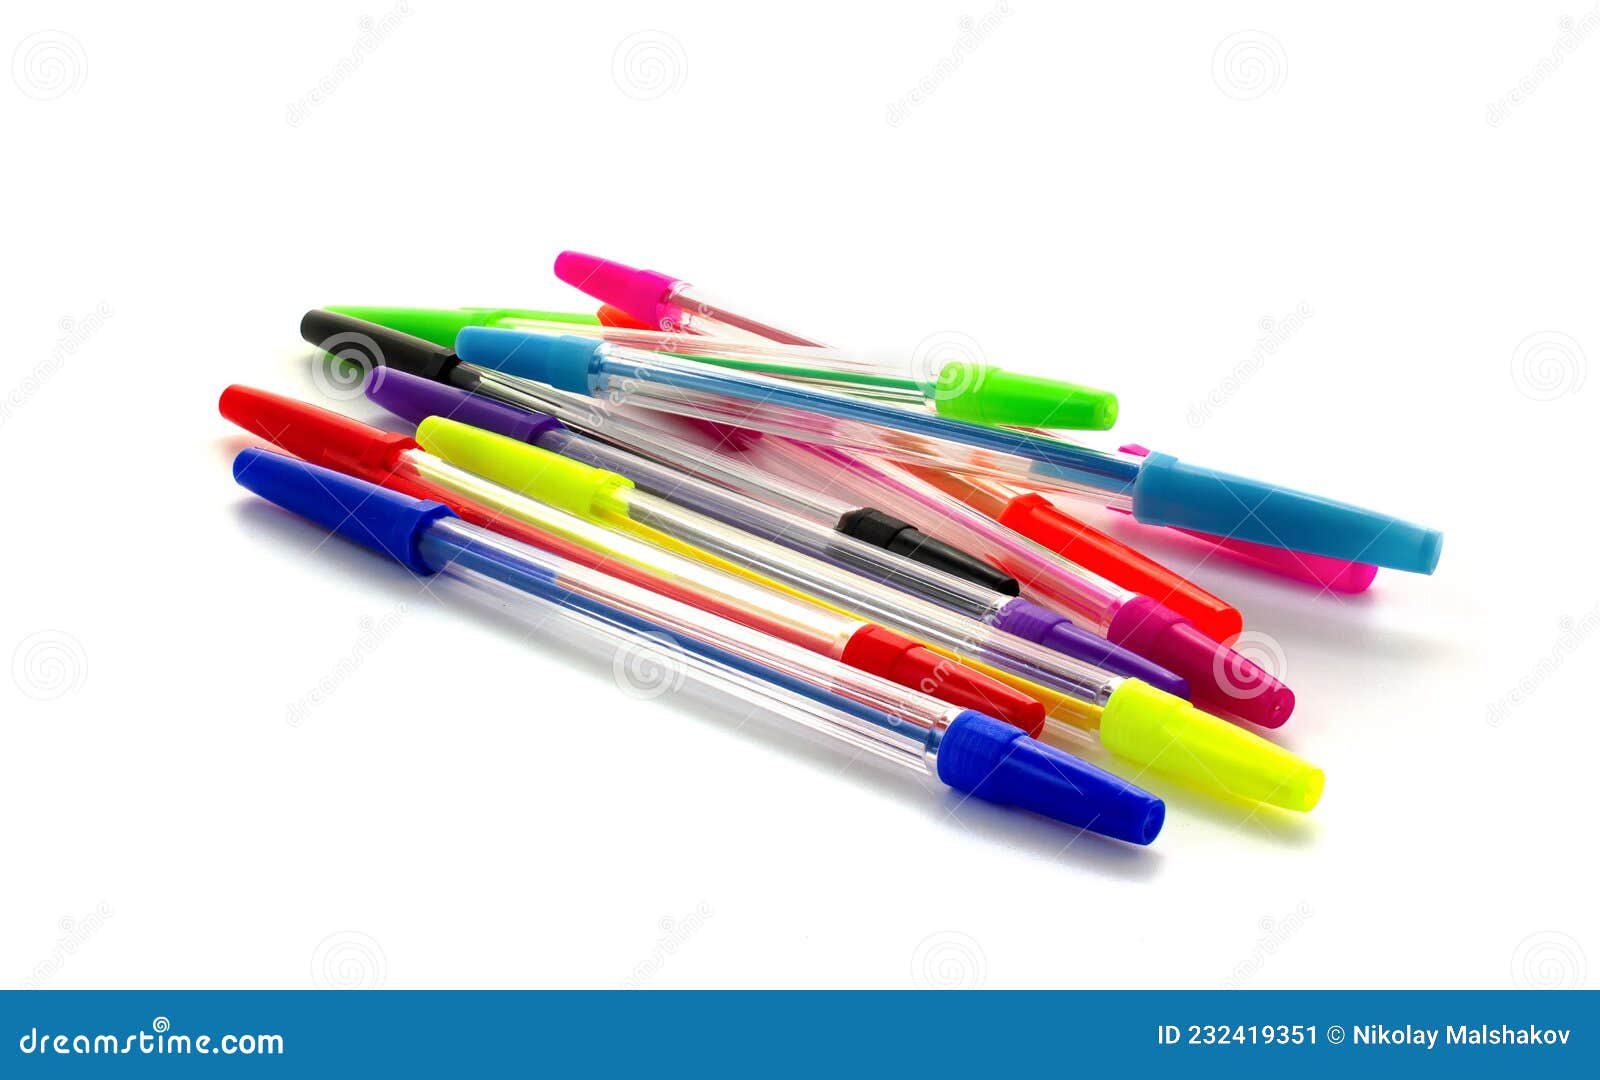 Multicolored Pens Isolated on White Background. Ballpoint Pens Lie